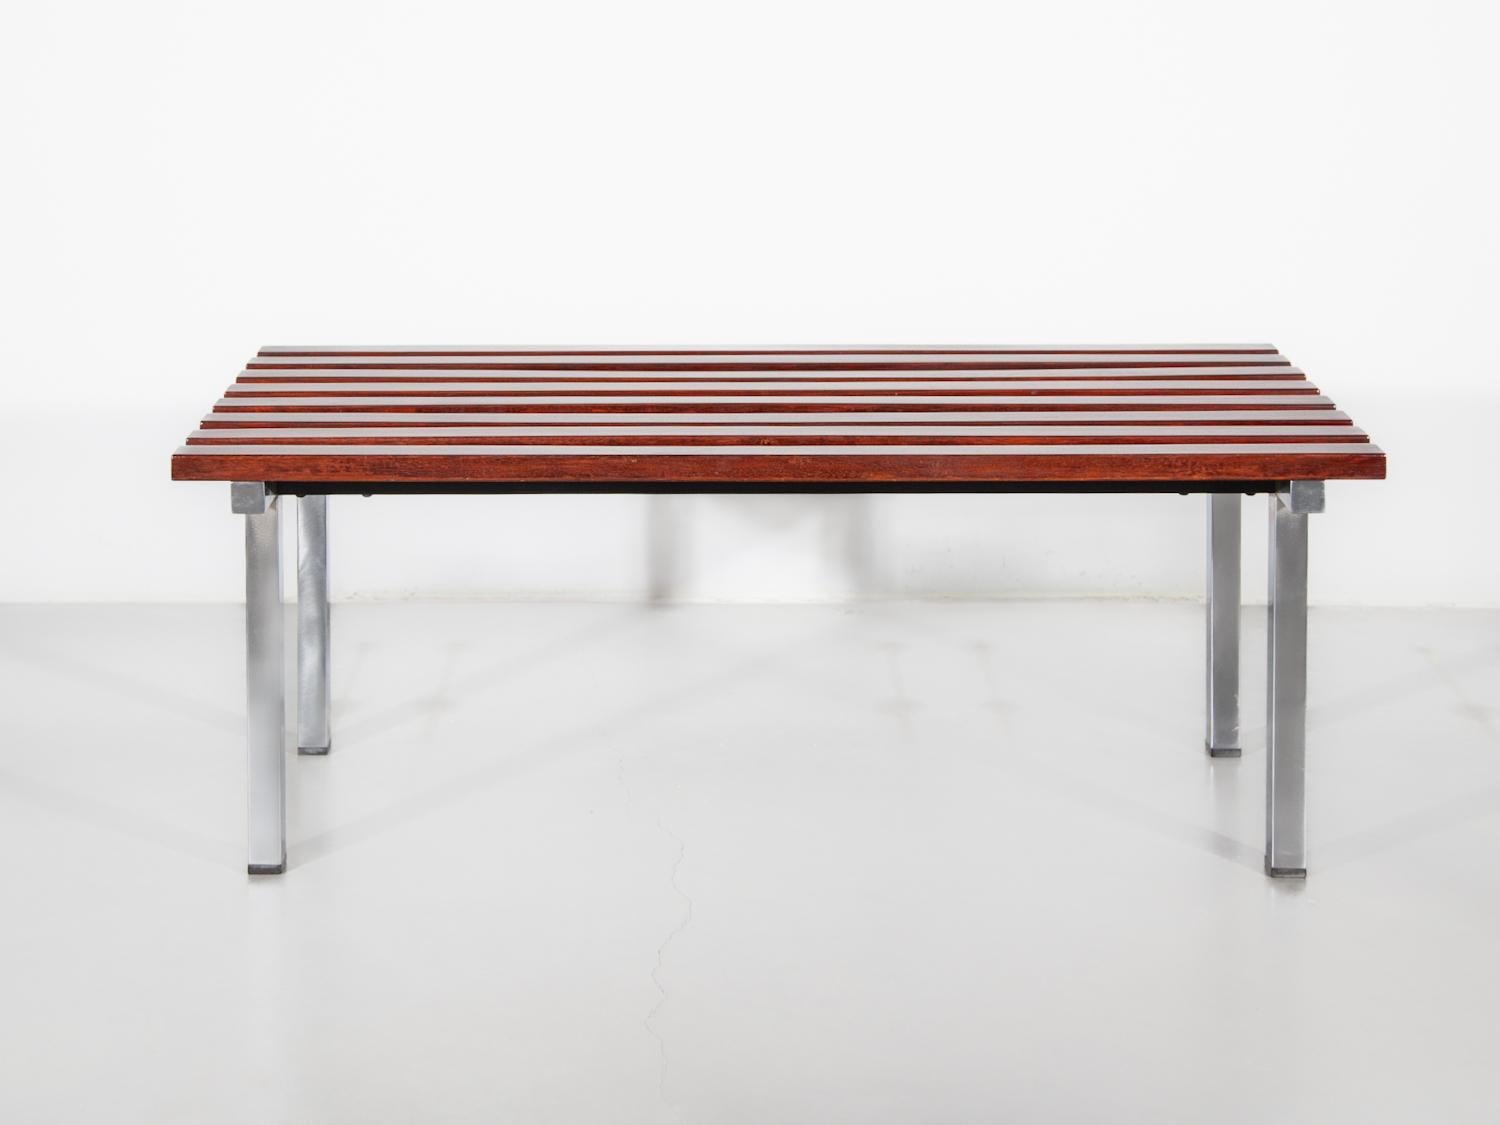 Minimalist slatted bench in dark wood with square chrome base. Great bench to decorate your hallway, living-room or office space. In original very good condition.